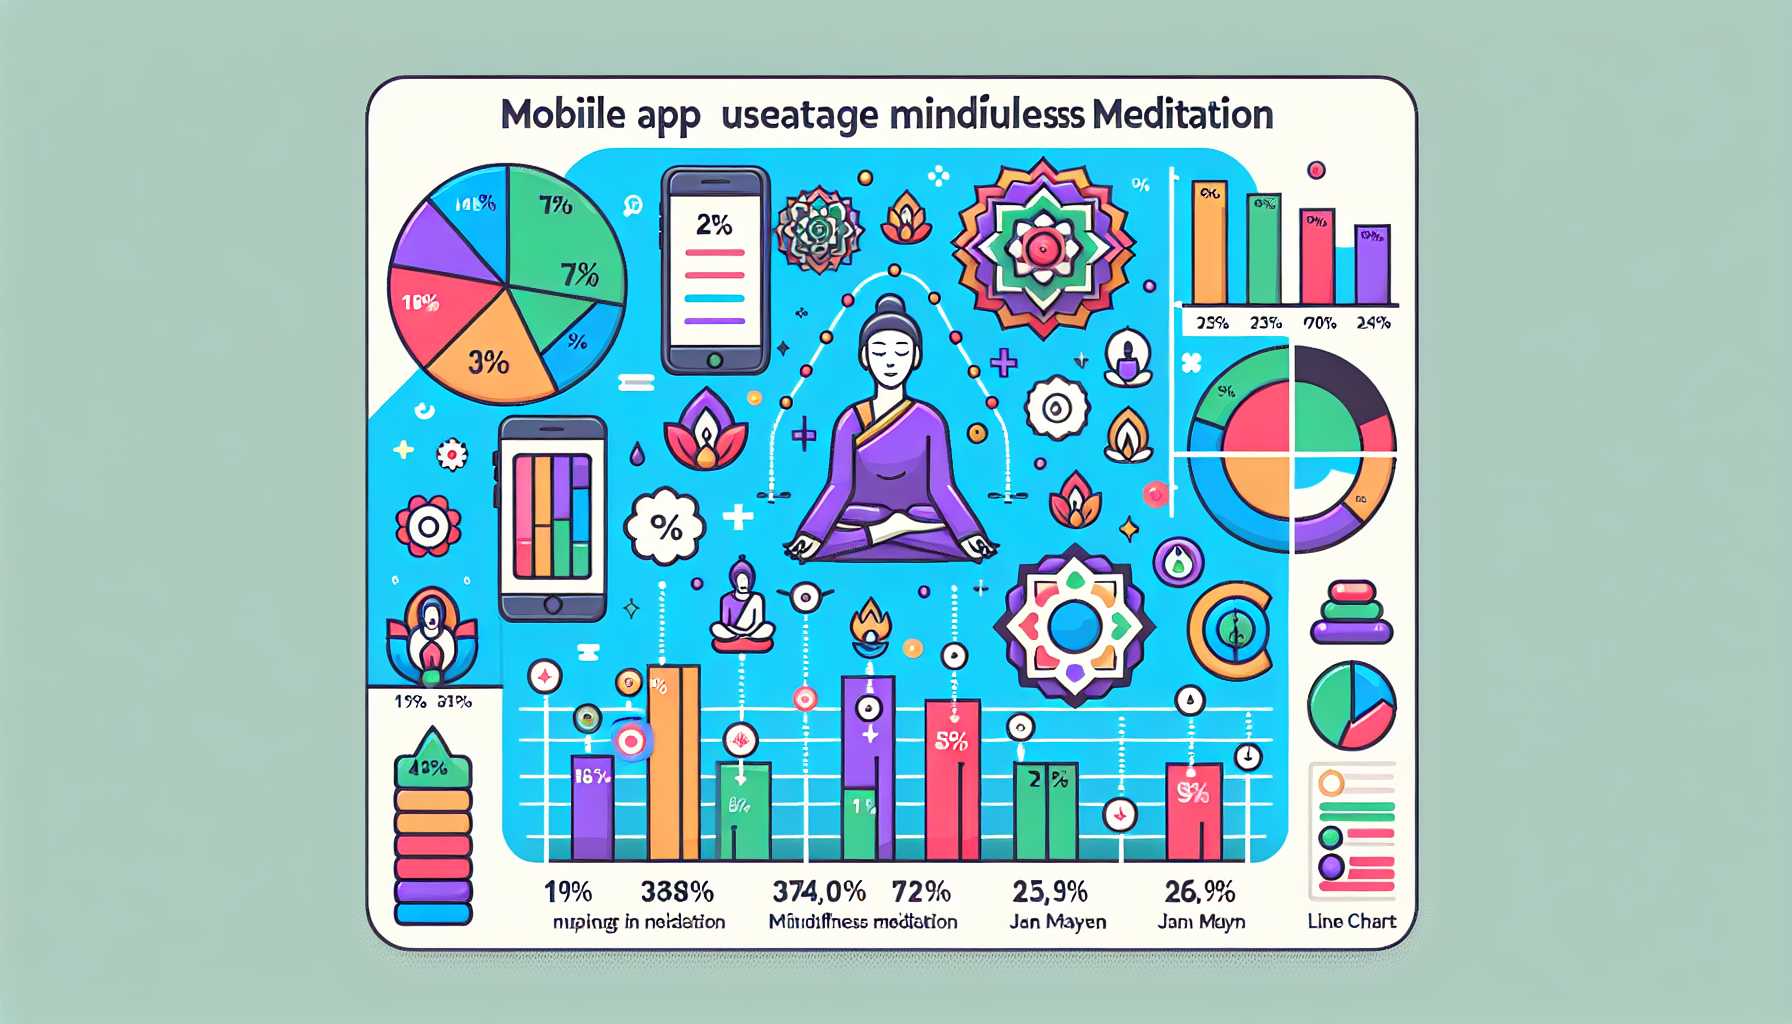 Graph showing the percentage of people in Jan Mayen who use mobile apps for meditation and mindfulness